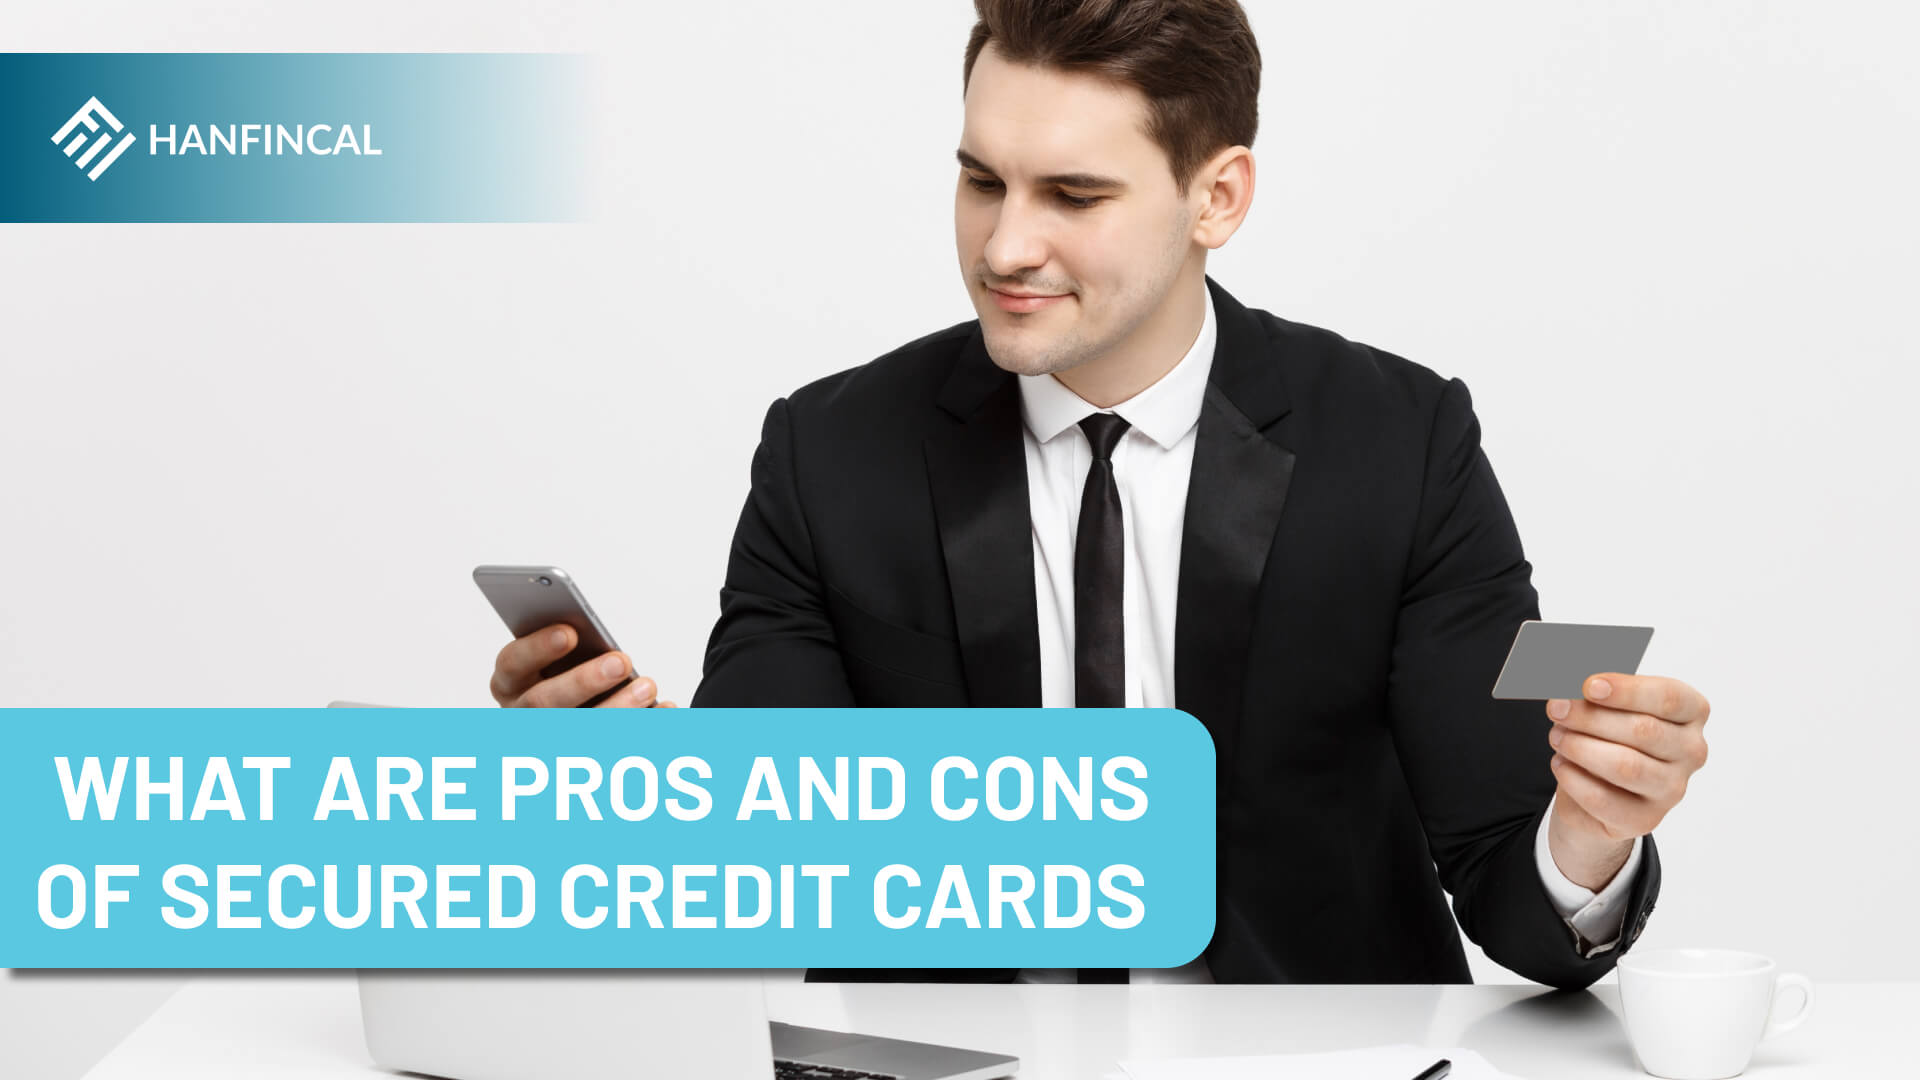 What are the pros and cons of secured credit cards?